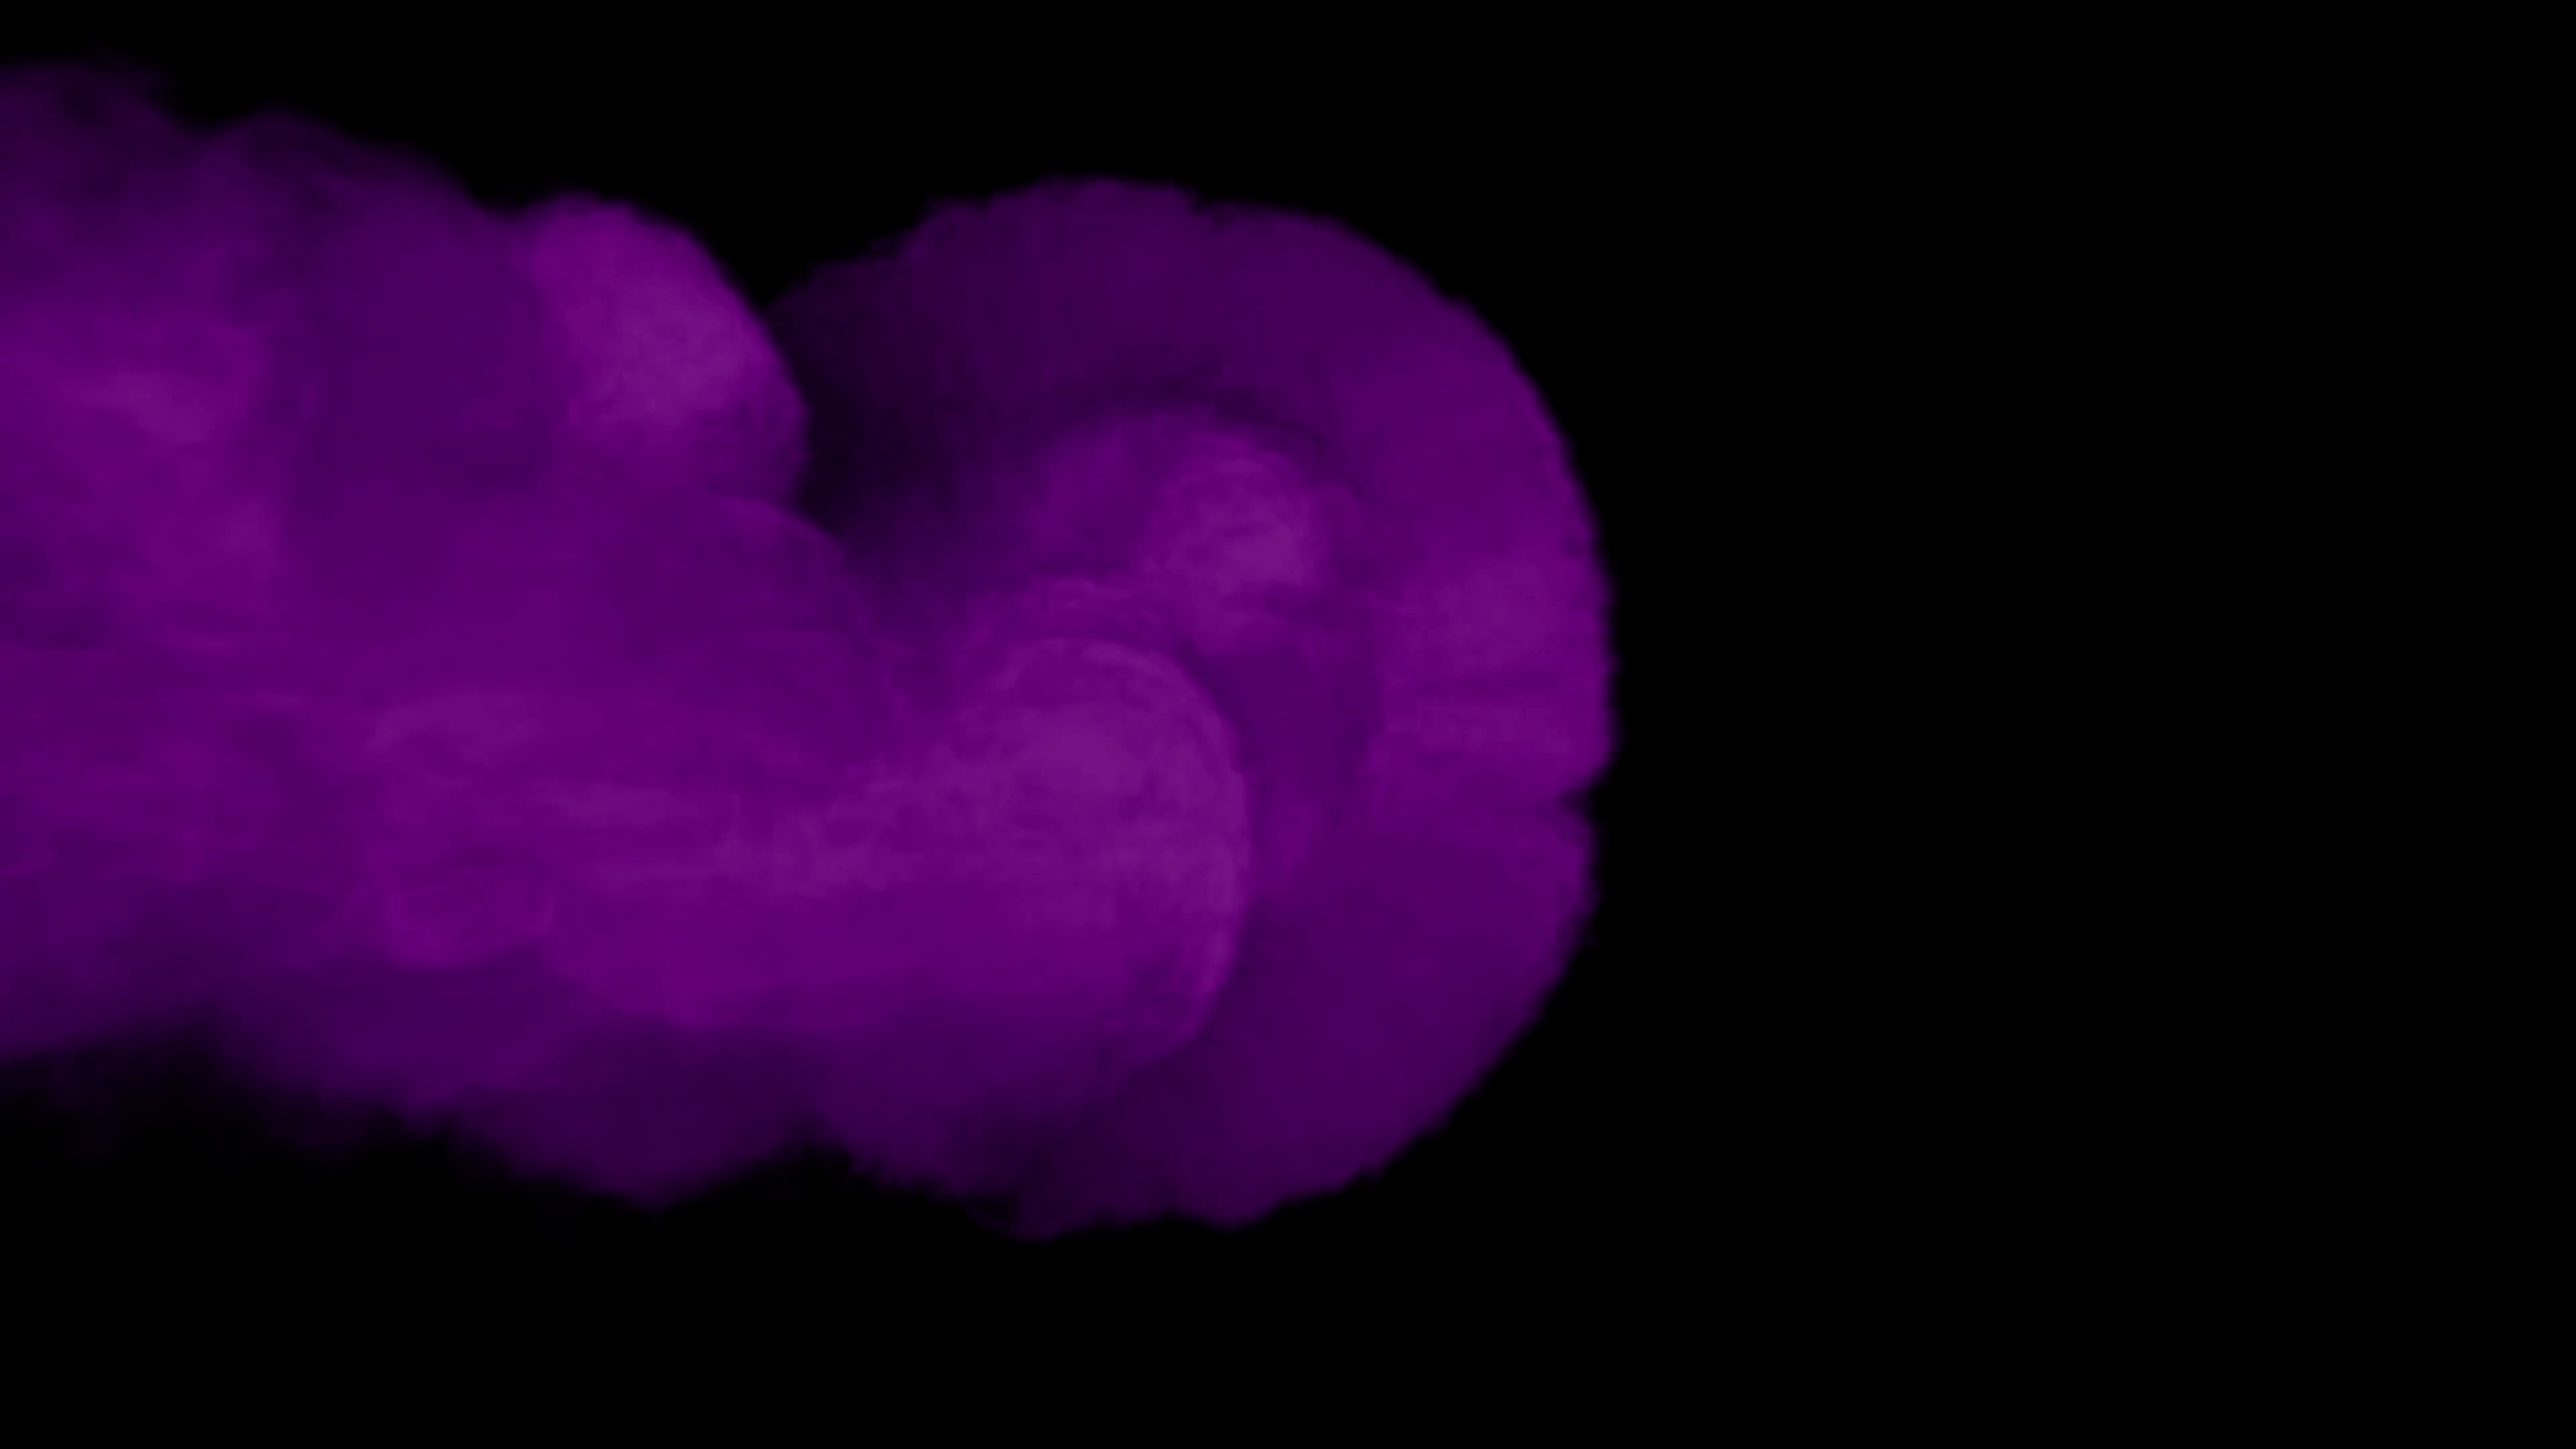 Animated purple toxic smoke filling up whole screen against